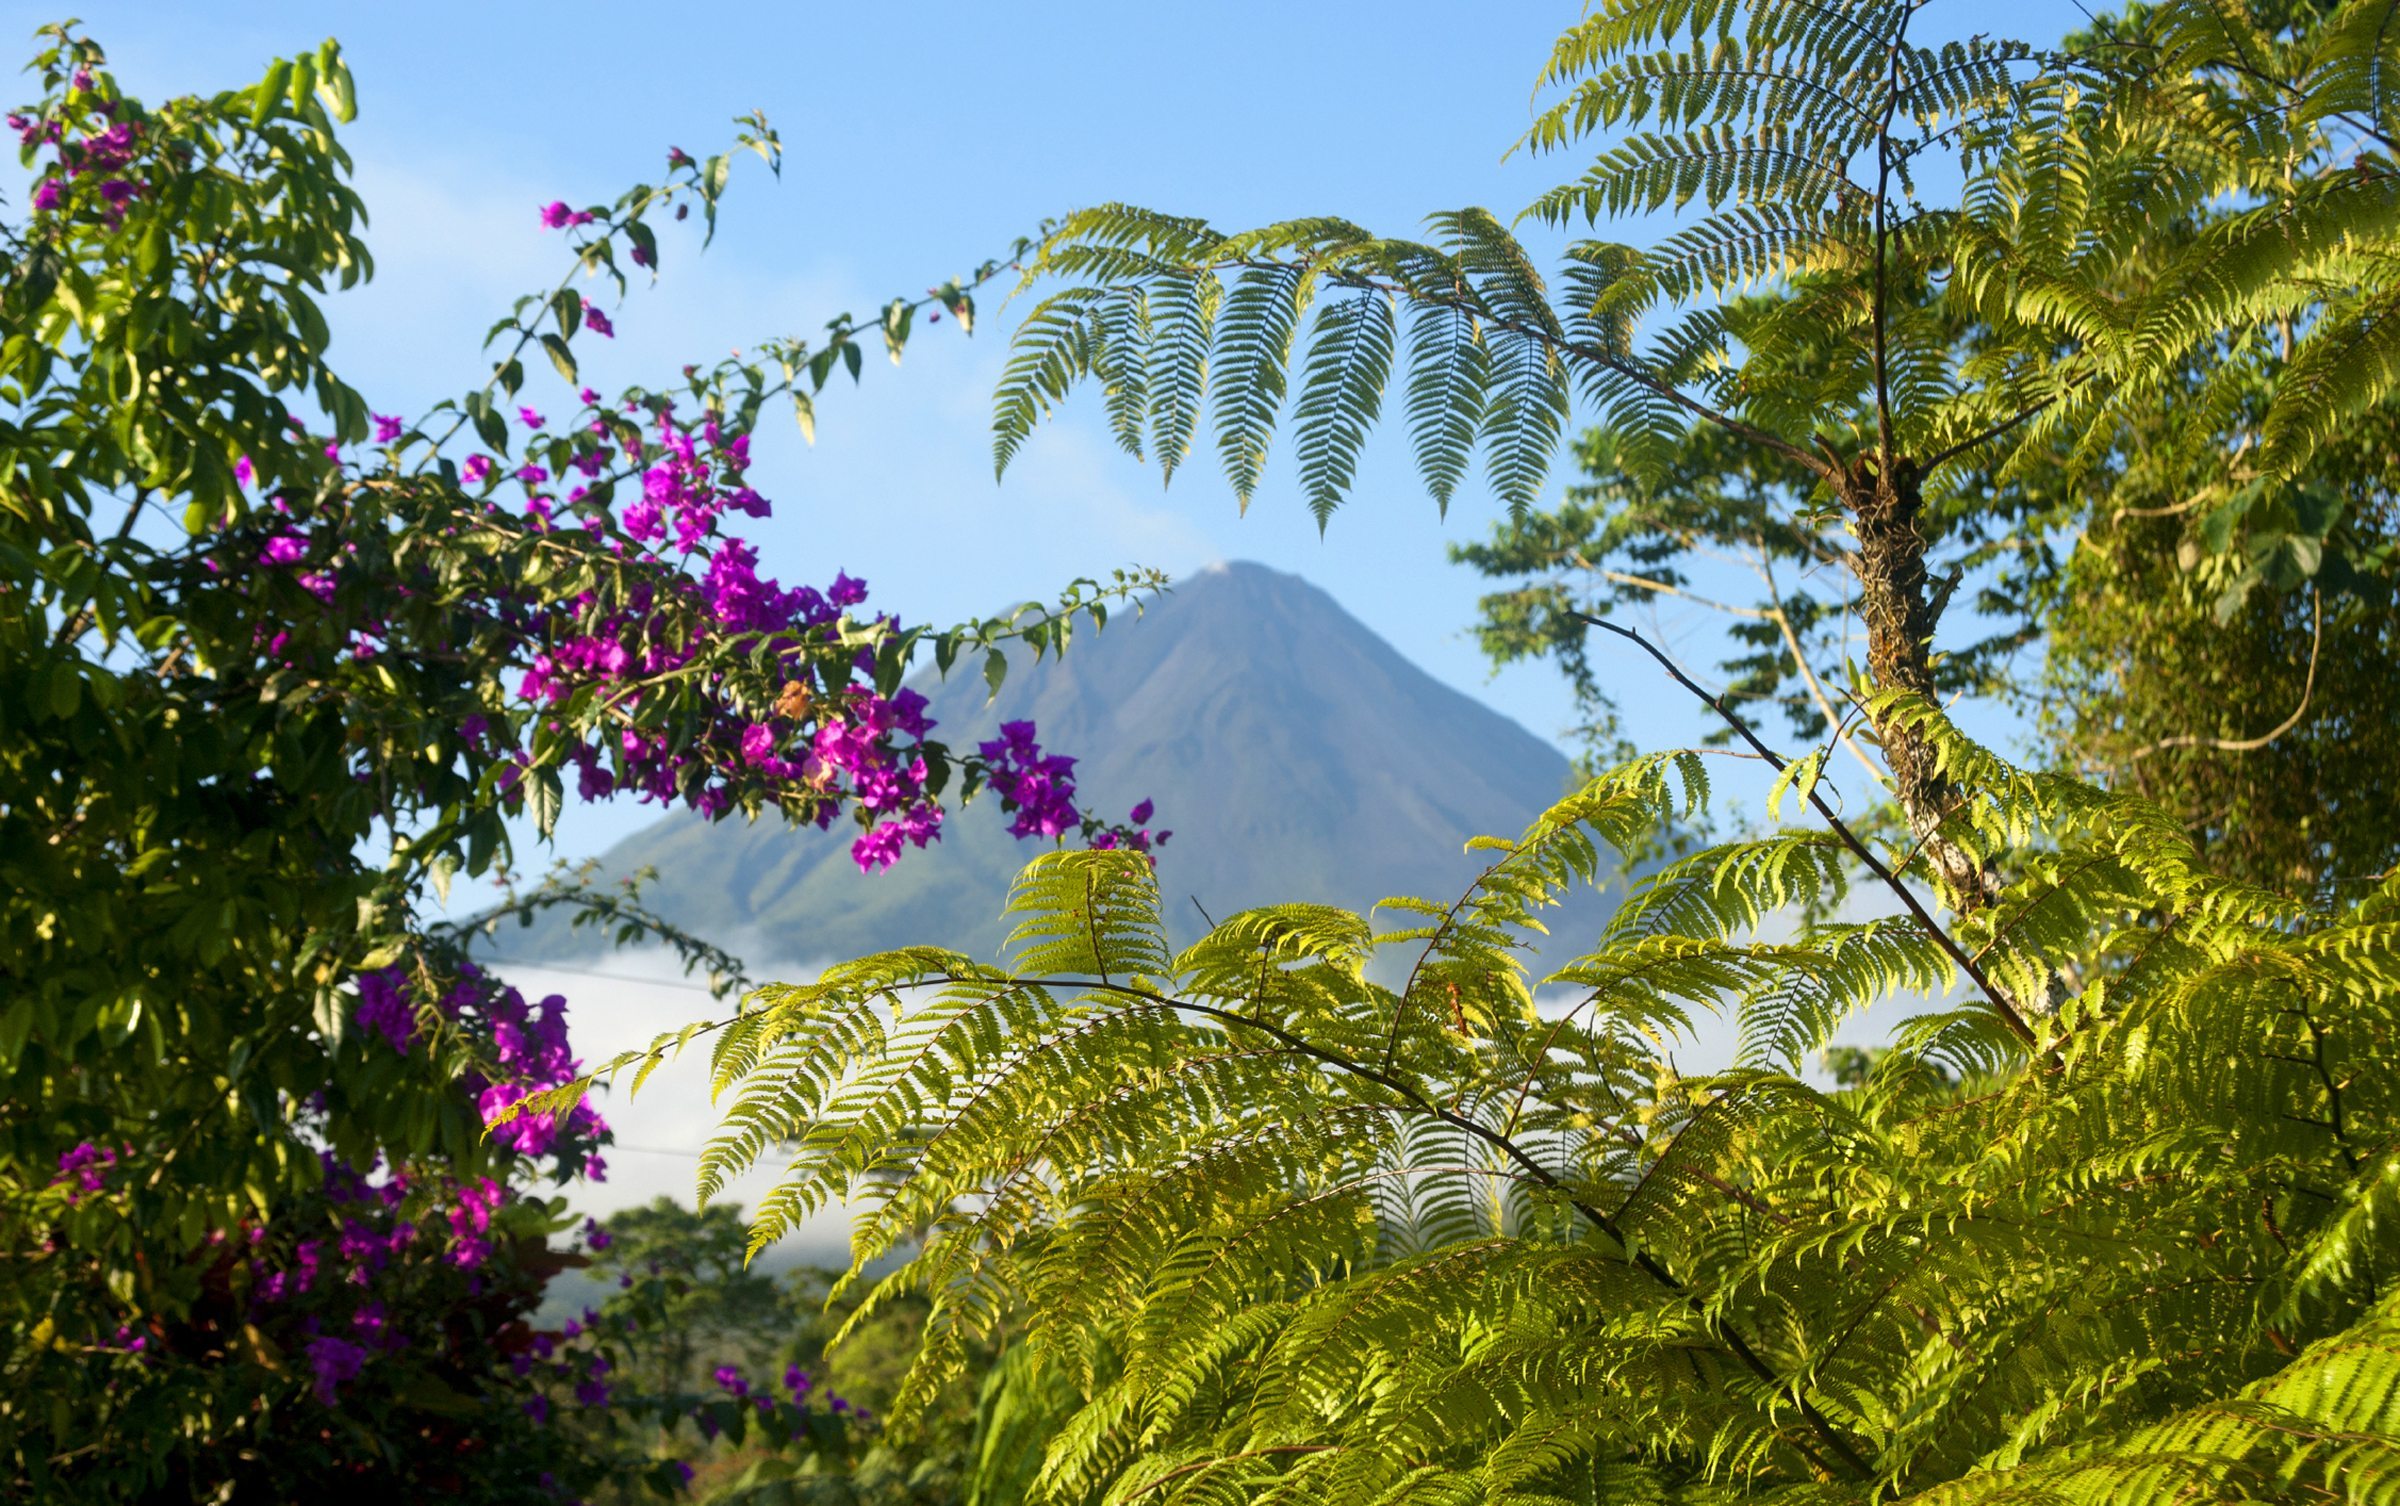 Fun Facts About Costa Rica: Did You Know?